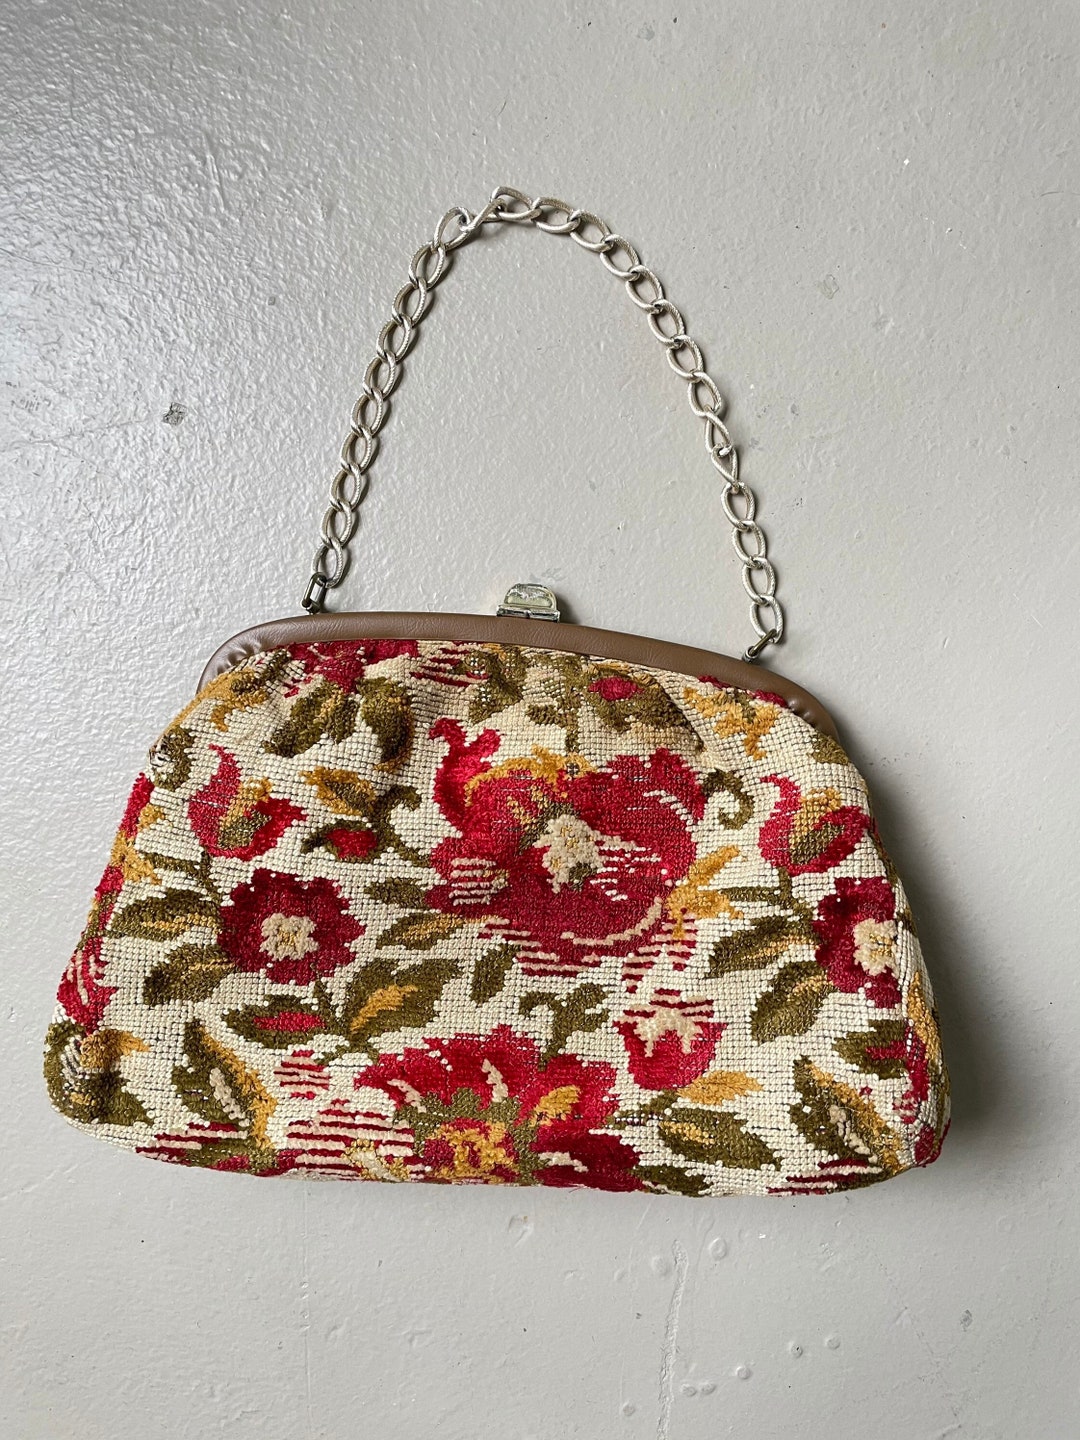 Vintage 1960's Floral Tapestry Style Handbag with Diamante Clasp